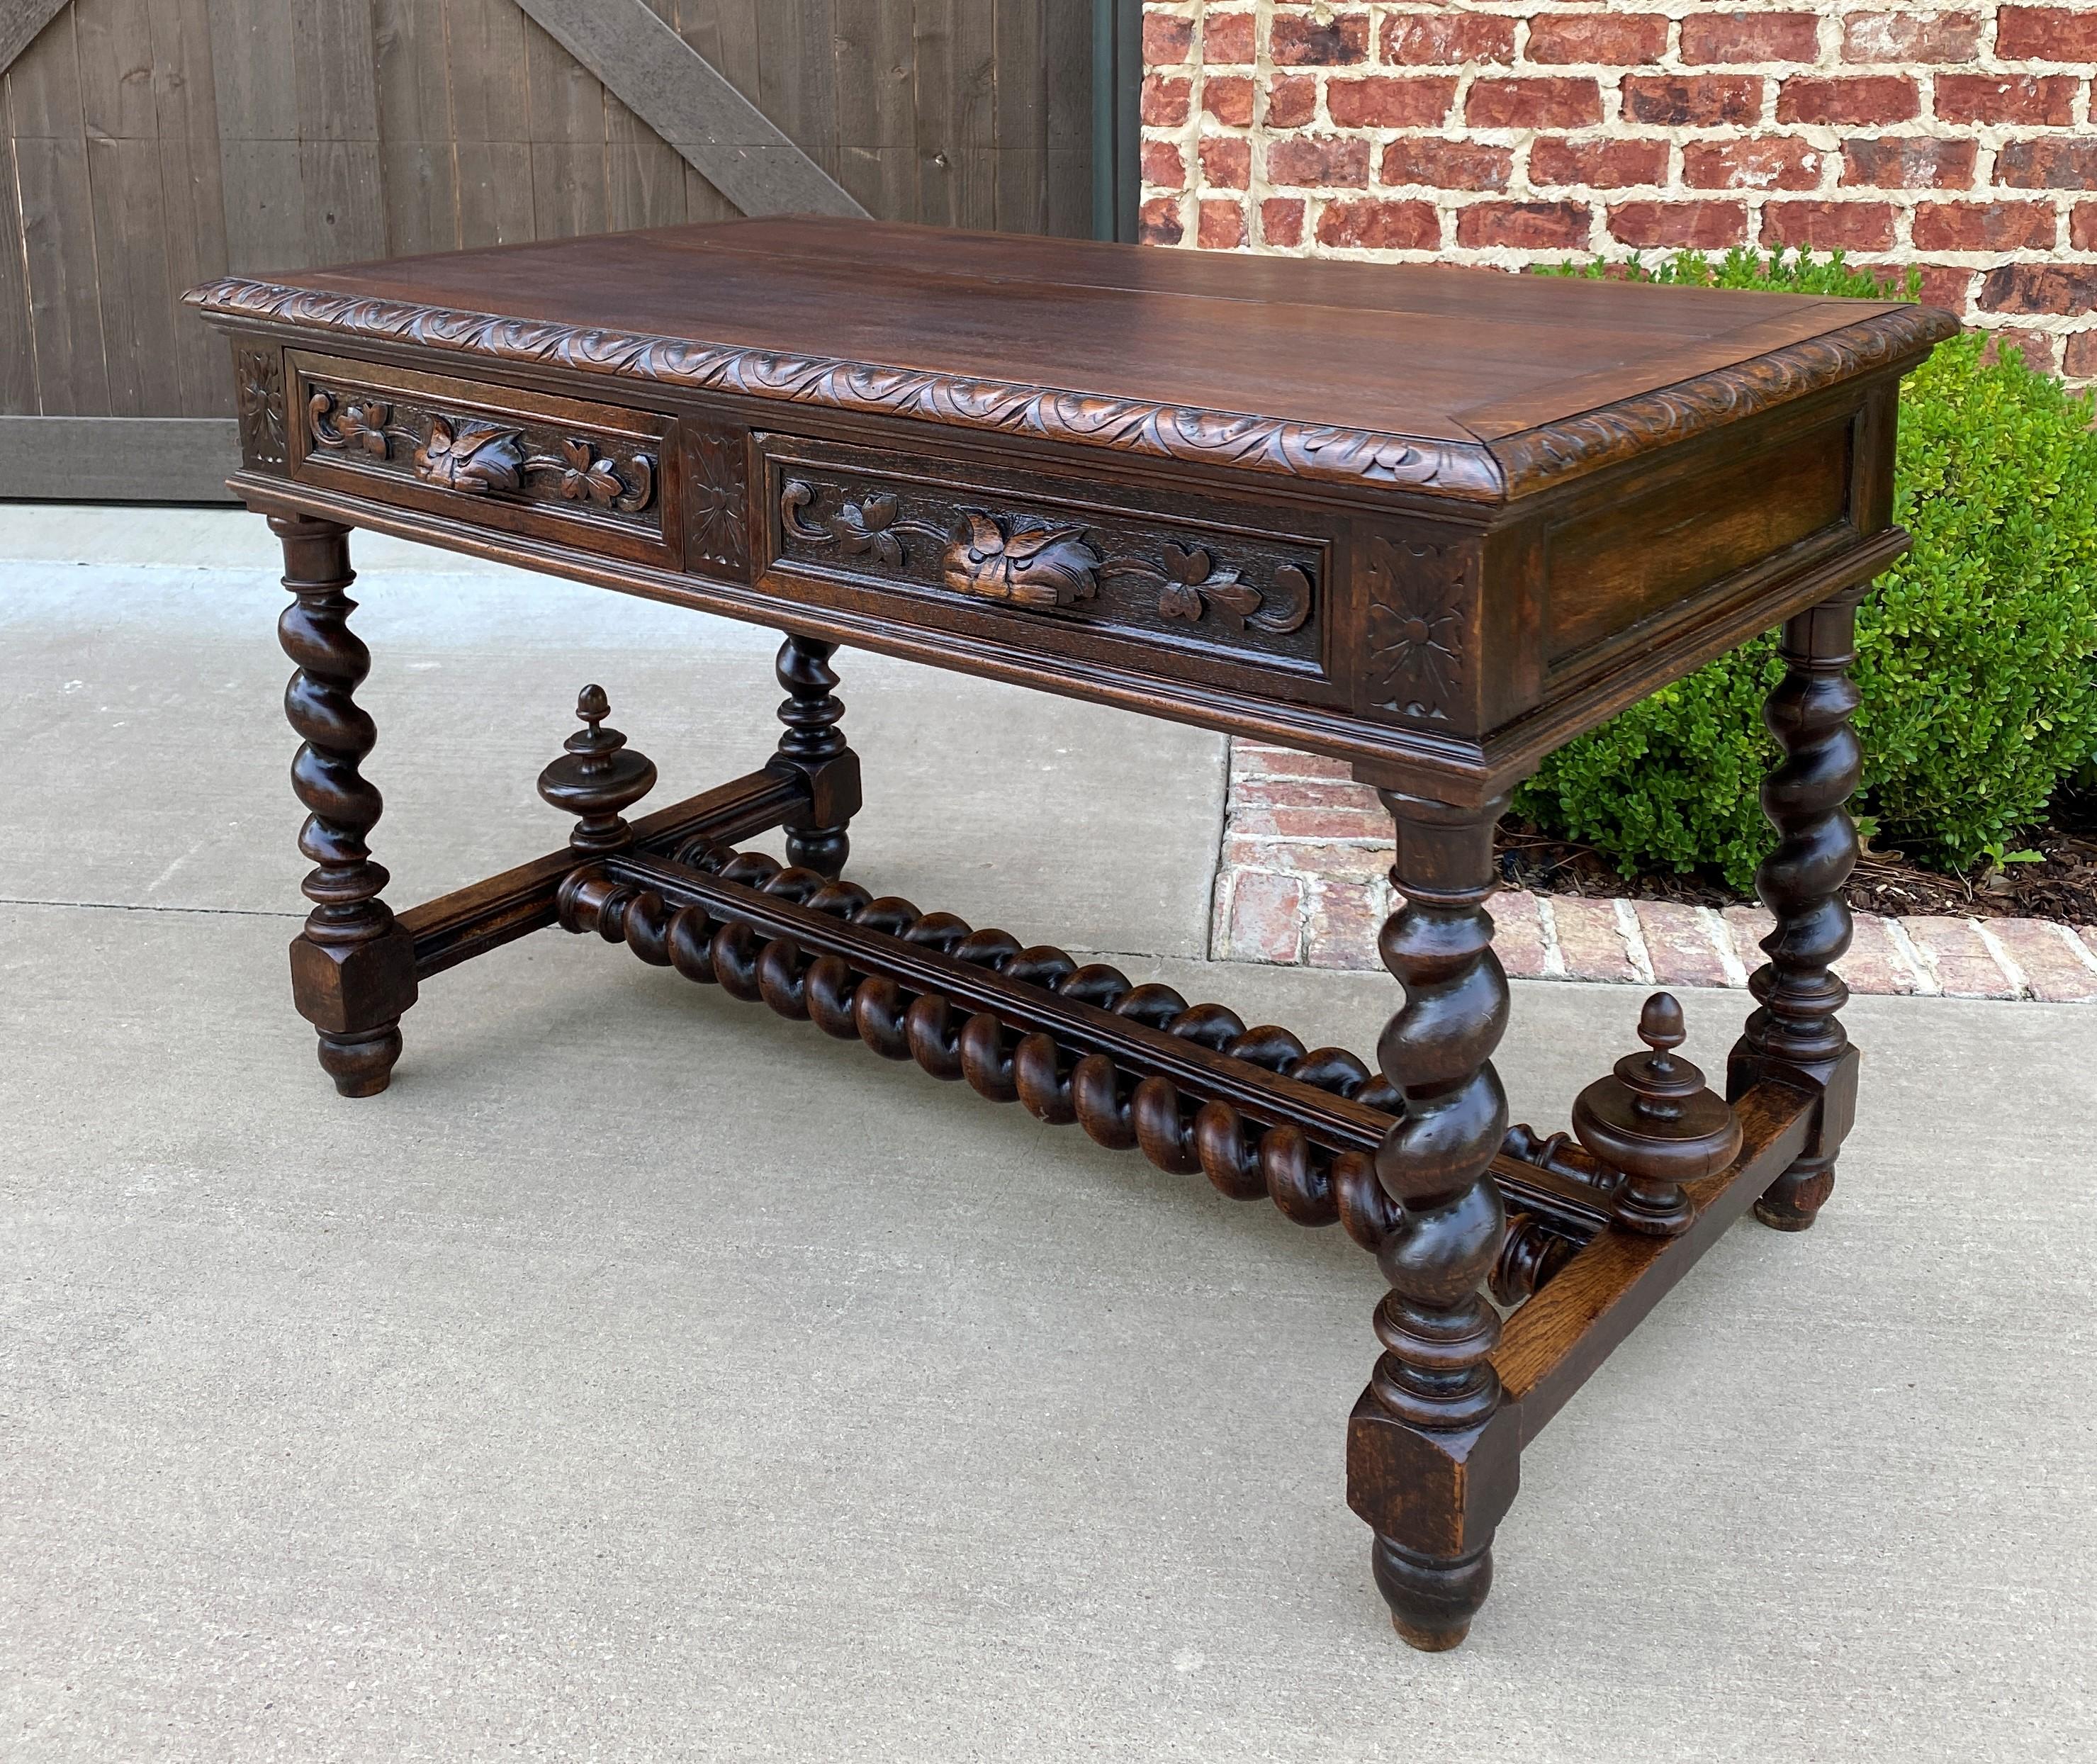 Superb 19th century antique French oak barley twist library office desk or table with drawers~~c. 1880s 

With so many people working from home , Desks are our most often requested items this year~~this is a gorgeous French oak desk with two